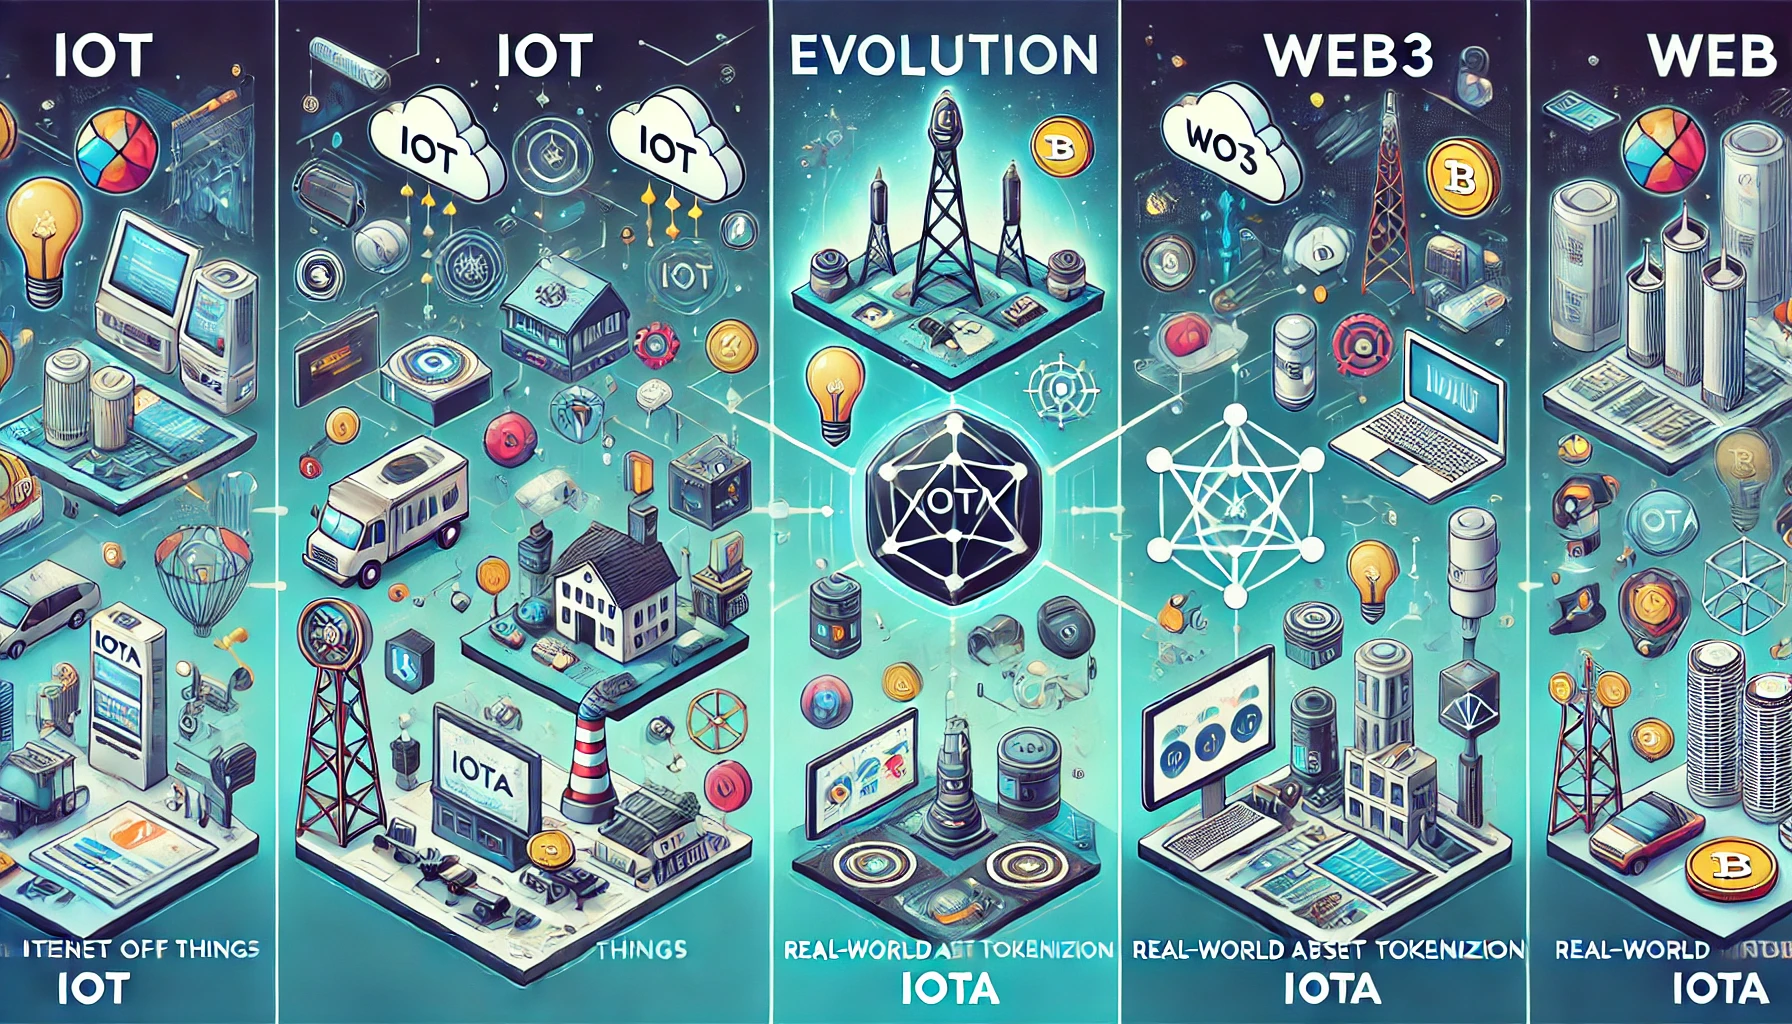 The Evolution of IOTA: From IoT to Web3 and Real-World Asset Tokenization